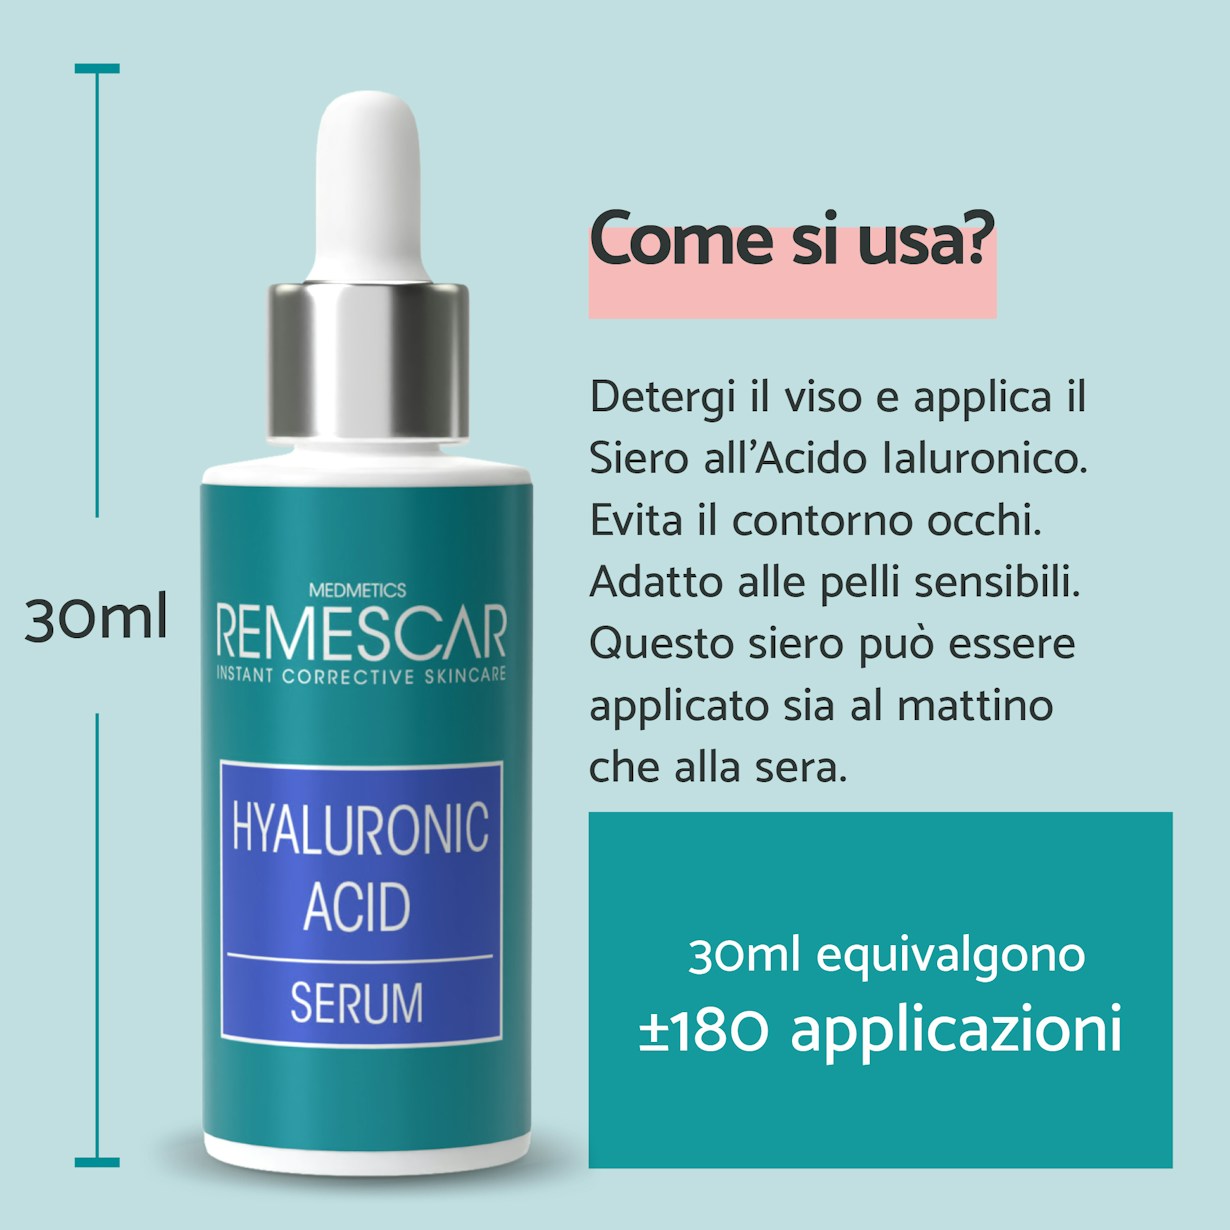 IT remescar pdp pictures website and amazon 2000x2000px hyaluronic acid3